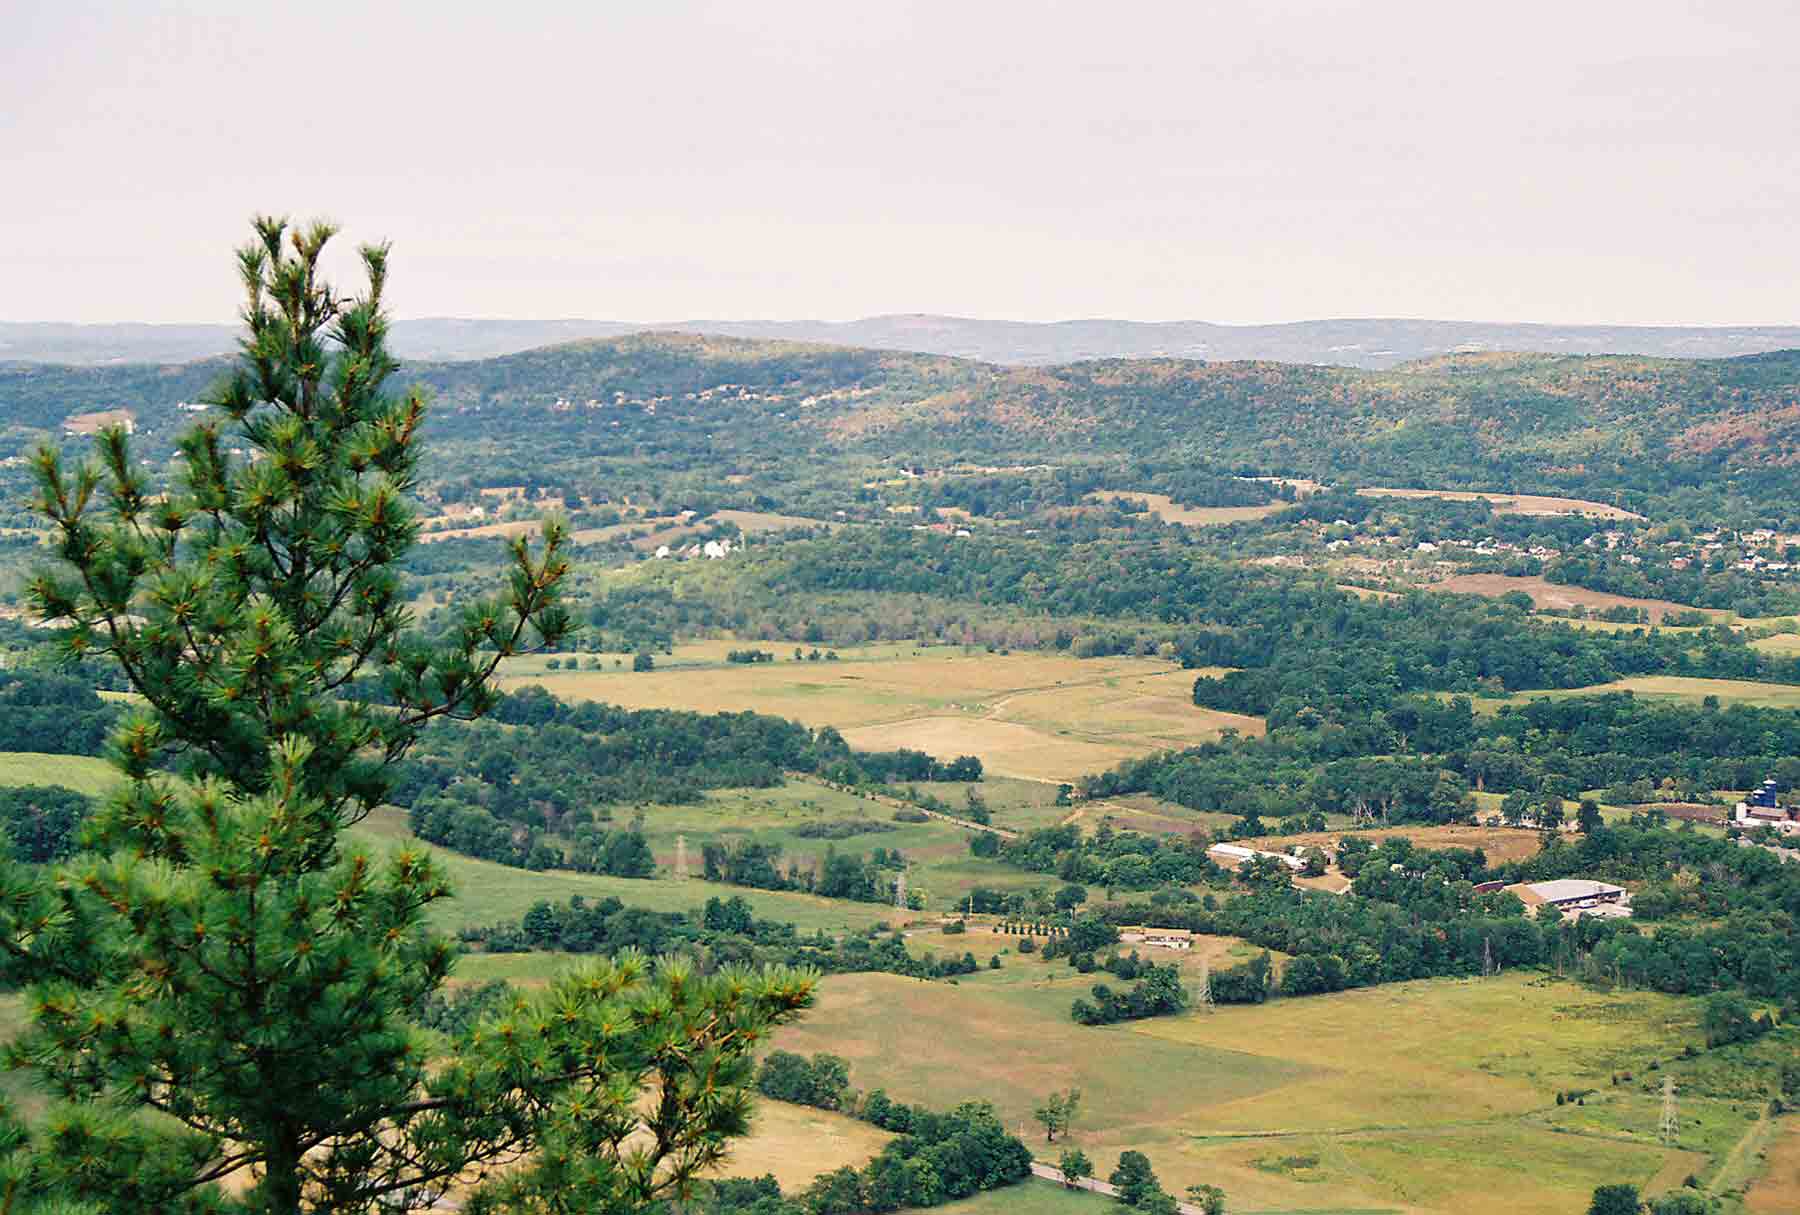 mm 7.8 - View west from Pinwheel's Vista. The closer range of mountains is Pochuk Mt., the more distant range is the Kittatiny Mts.  Courtesy dlcul@conncoll.edu